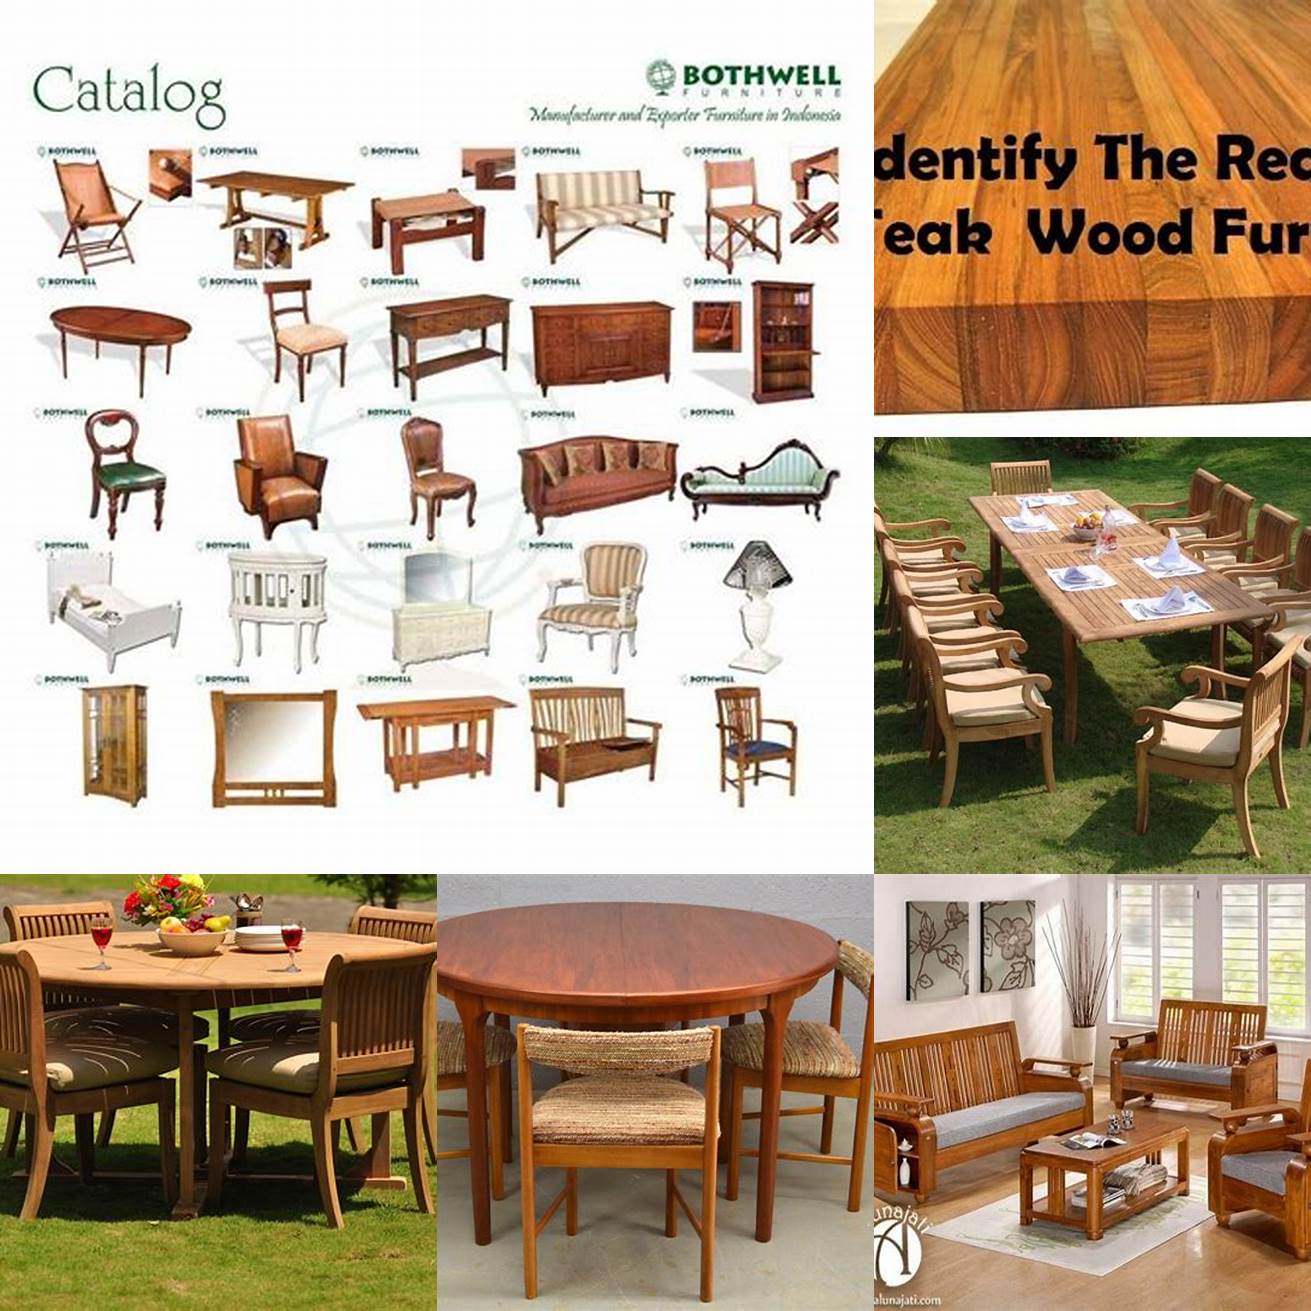 An illustration of the different types of teak furniture